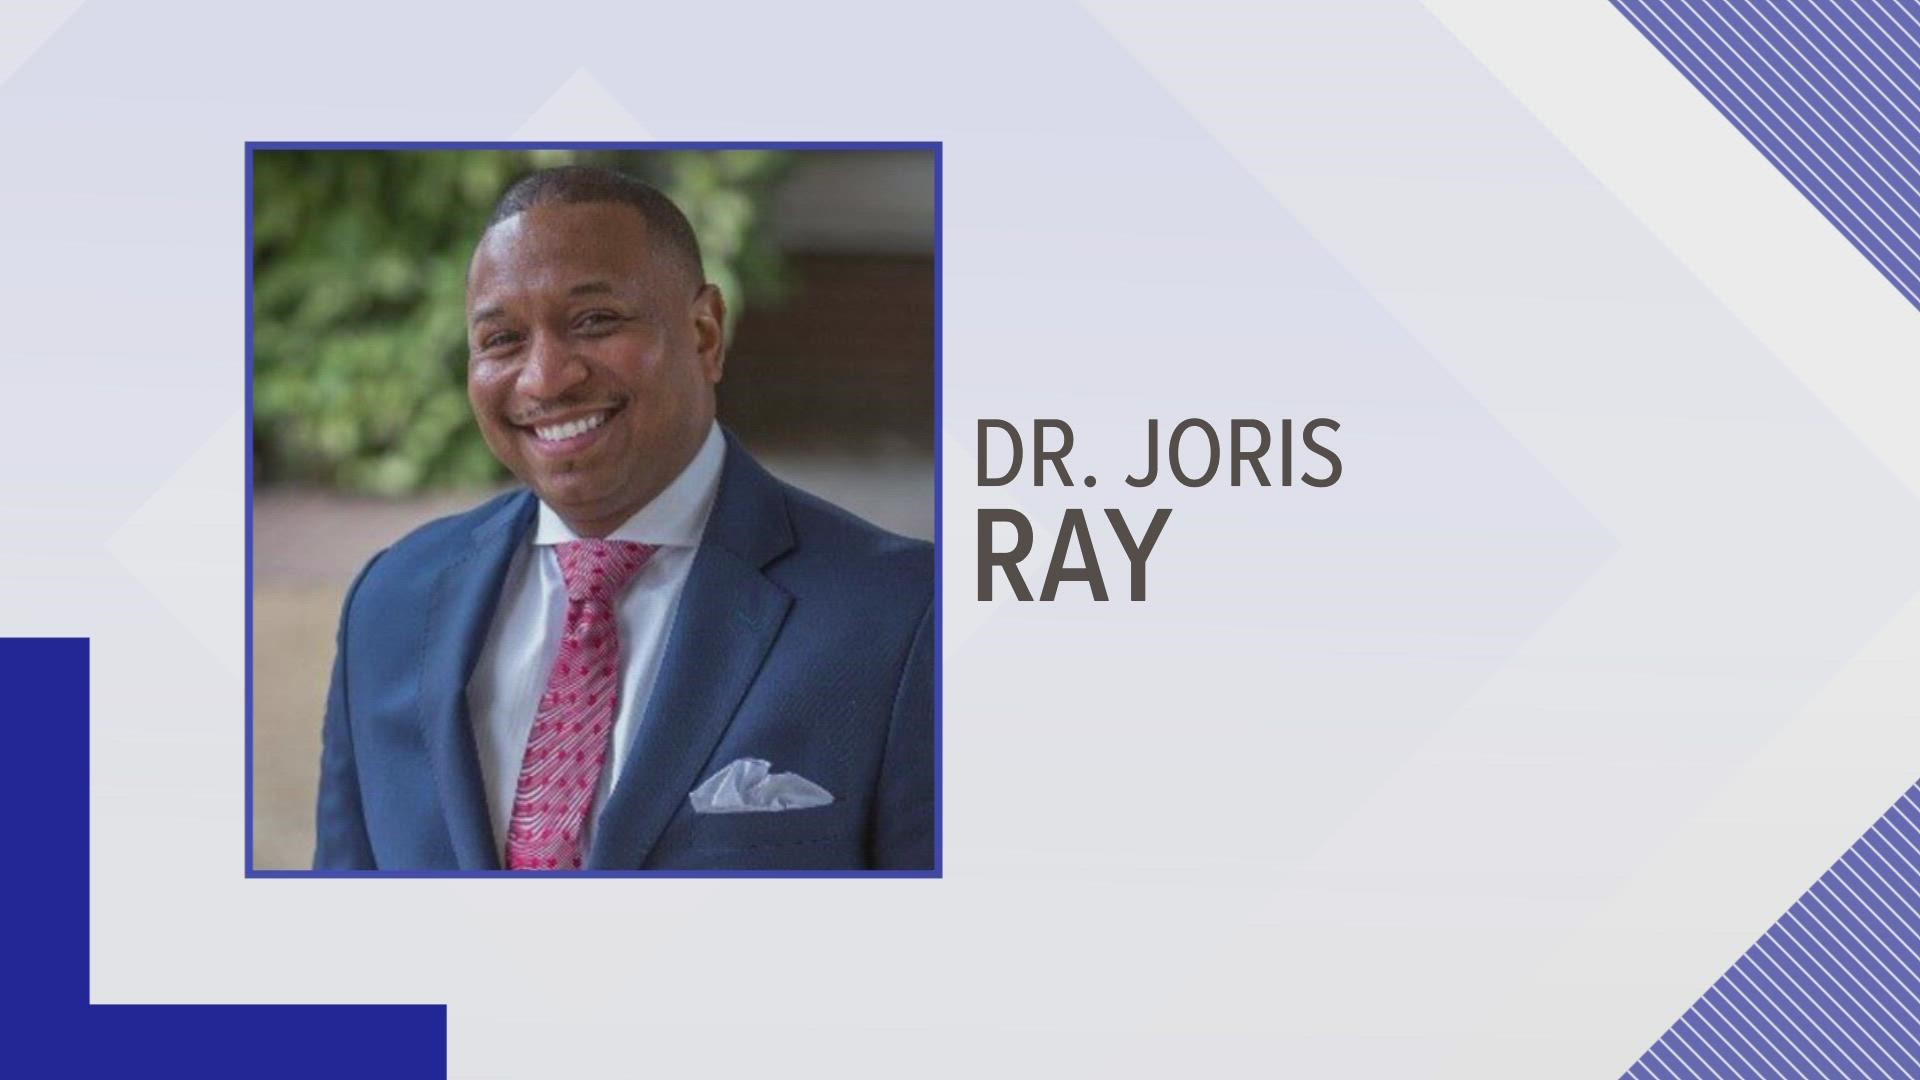 Richard Ransom gives his thoughts on MSCS Superintendent Dr. Joris Ray being placed on administrative leave.